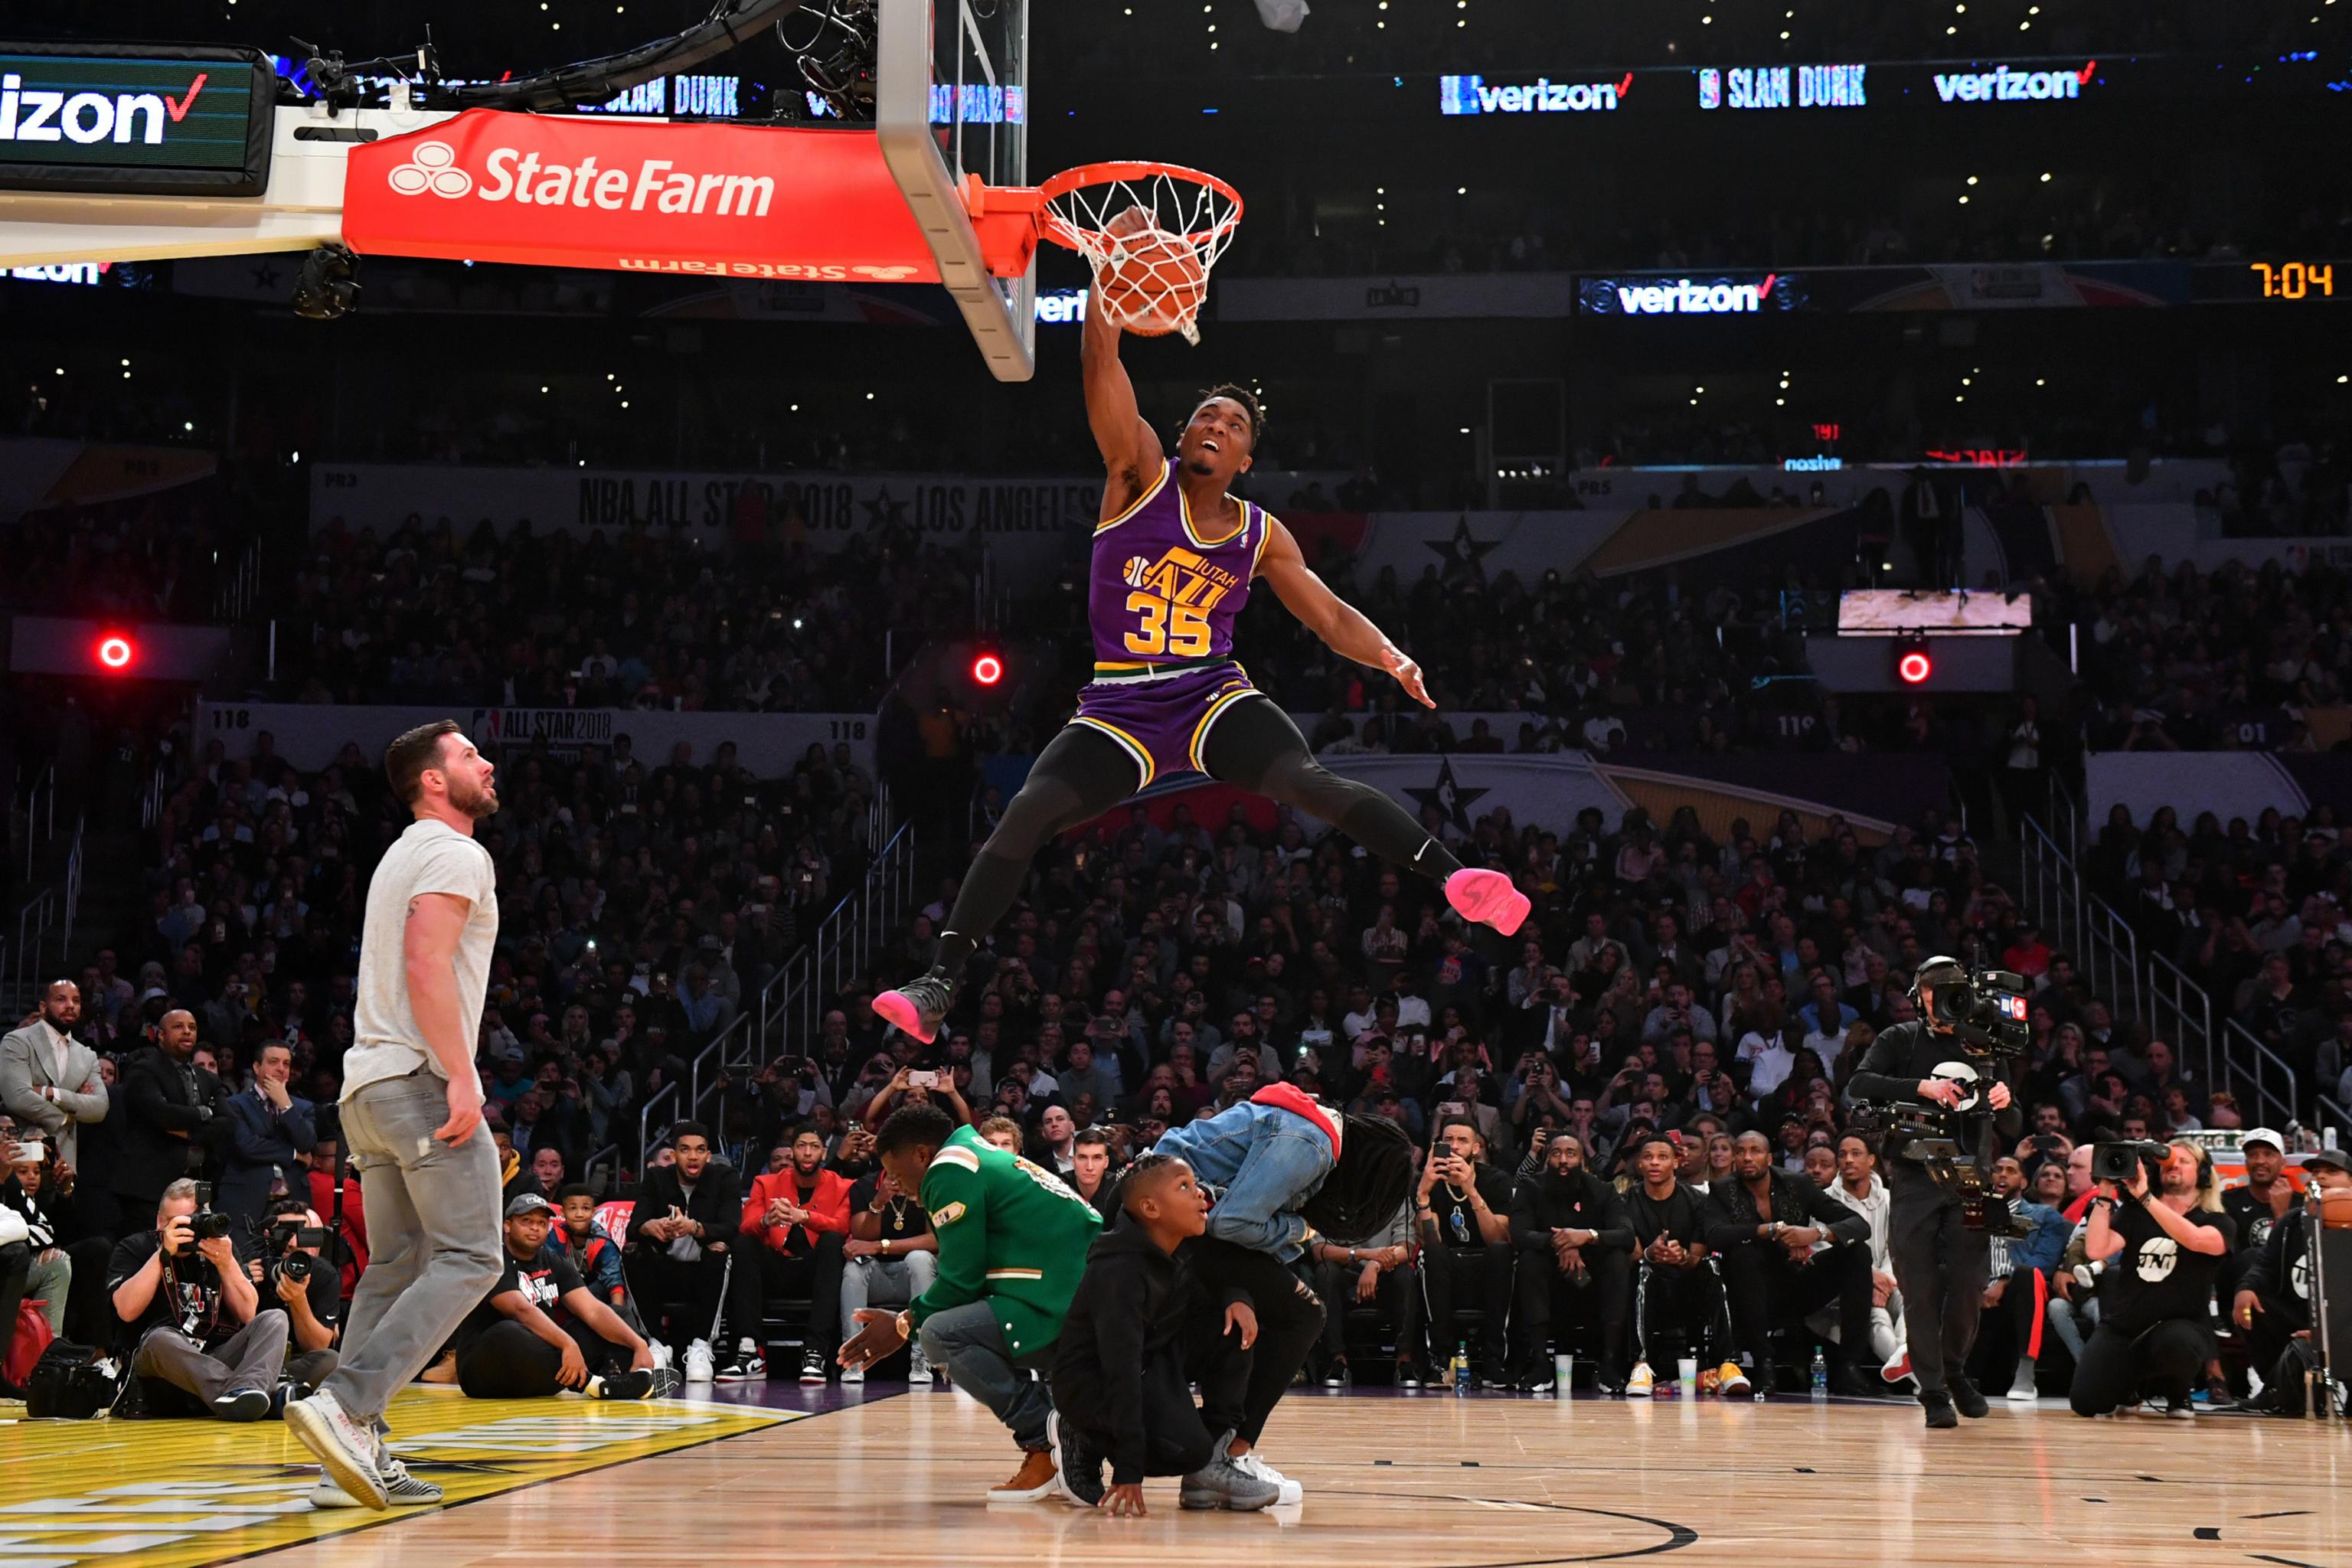 All-Star dunk contest: Utah's Donovan Mitchell wins with nod to